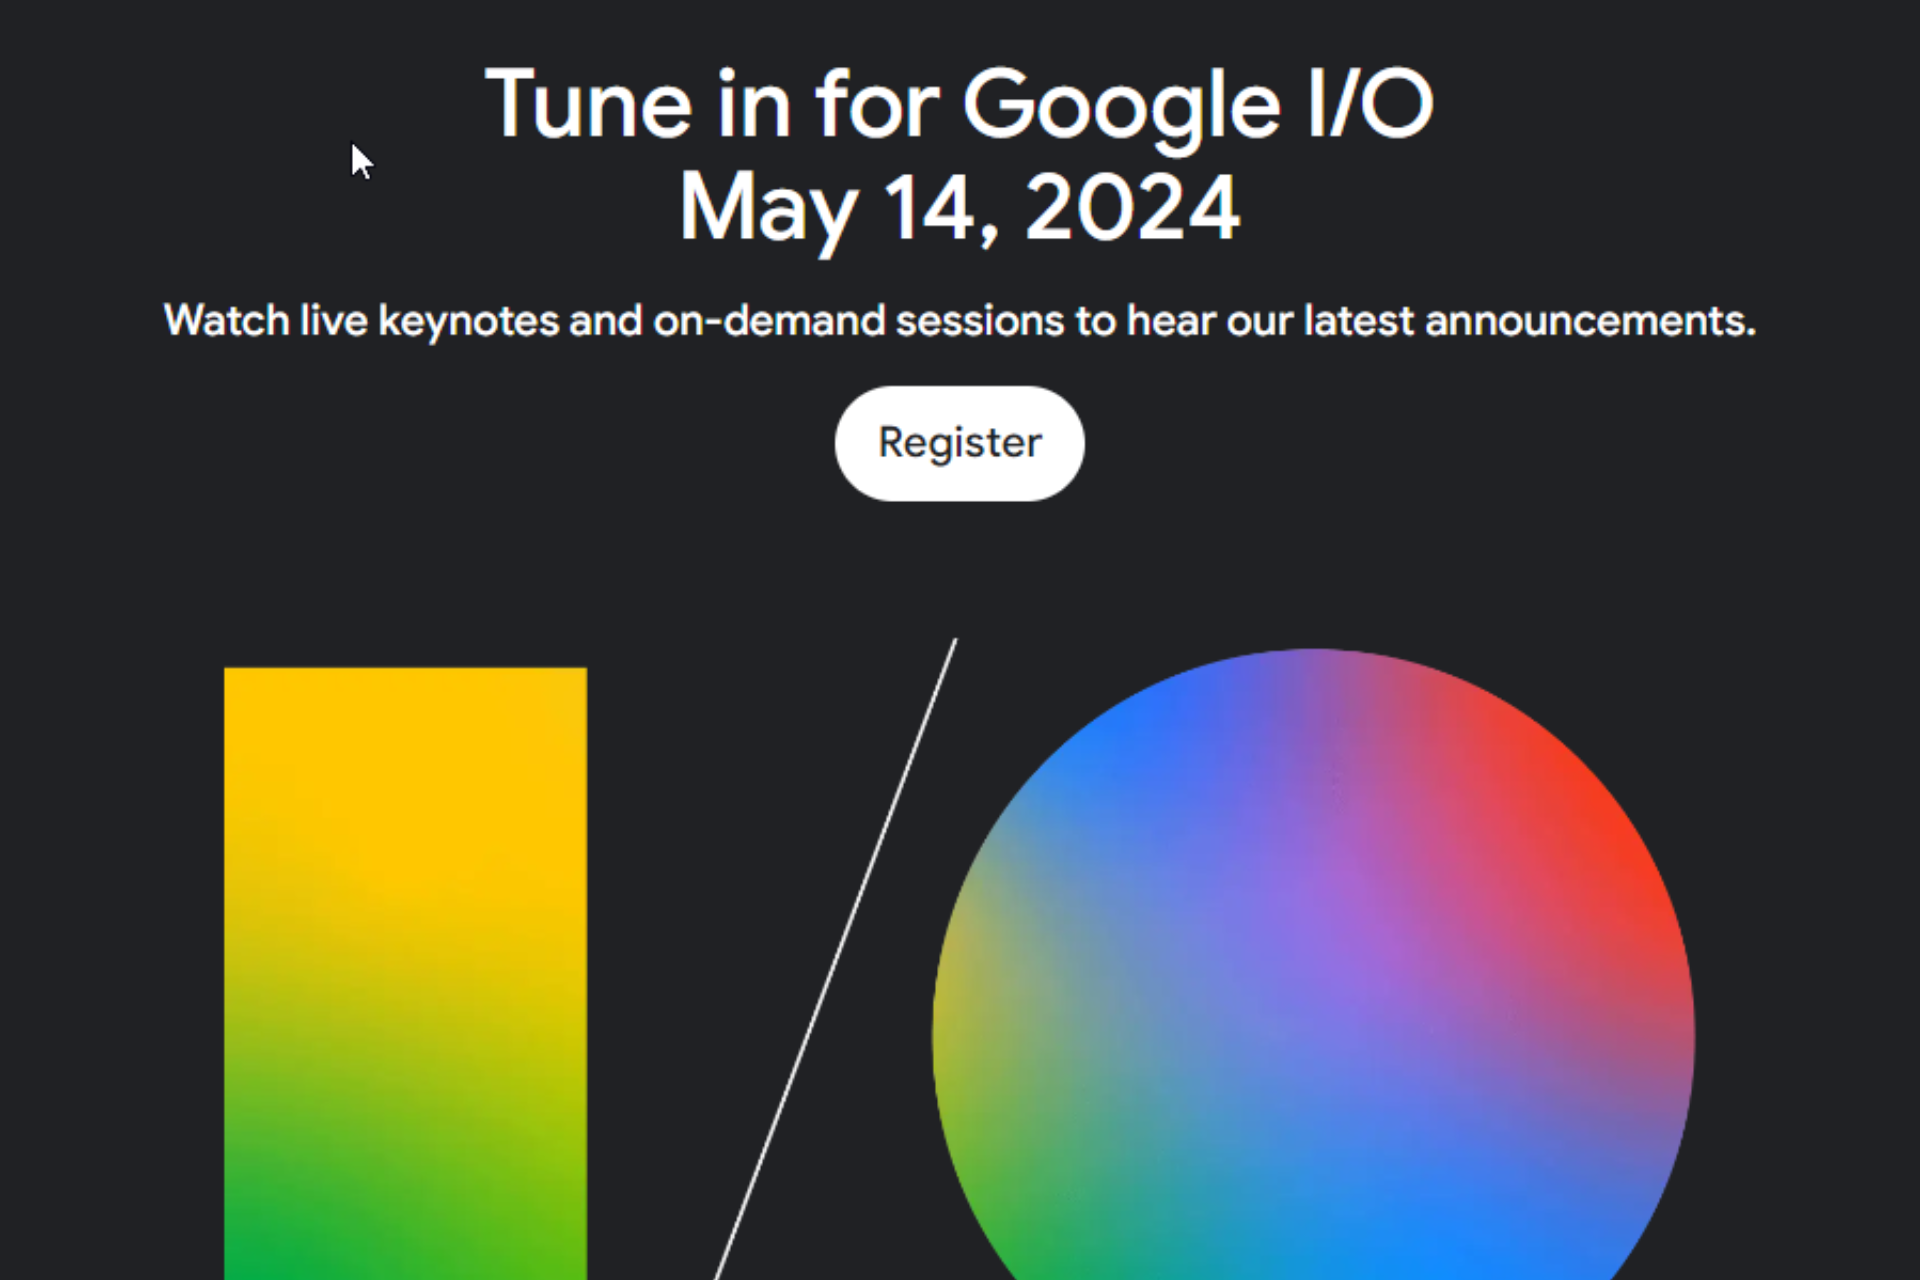 Google I/O 2024: Here is what you can expect